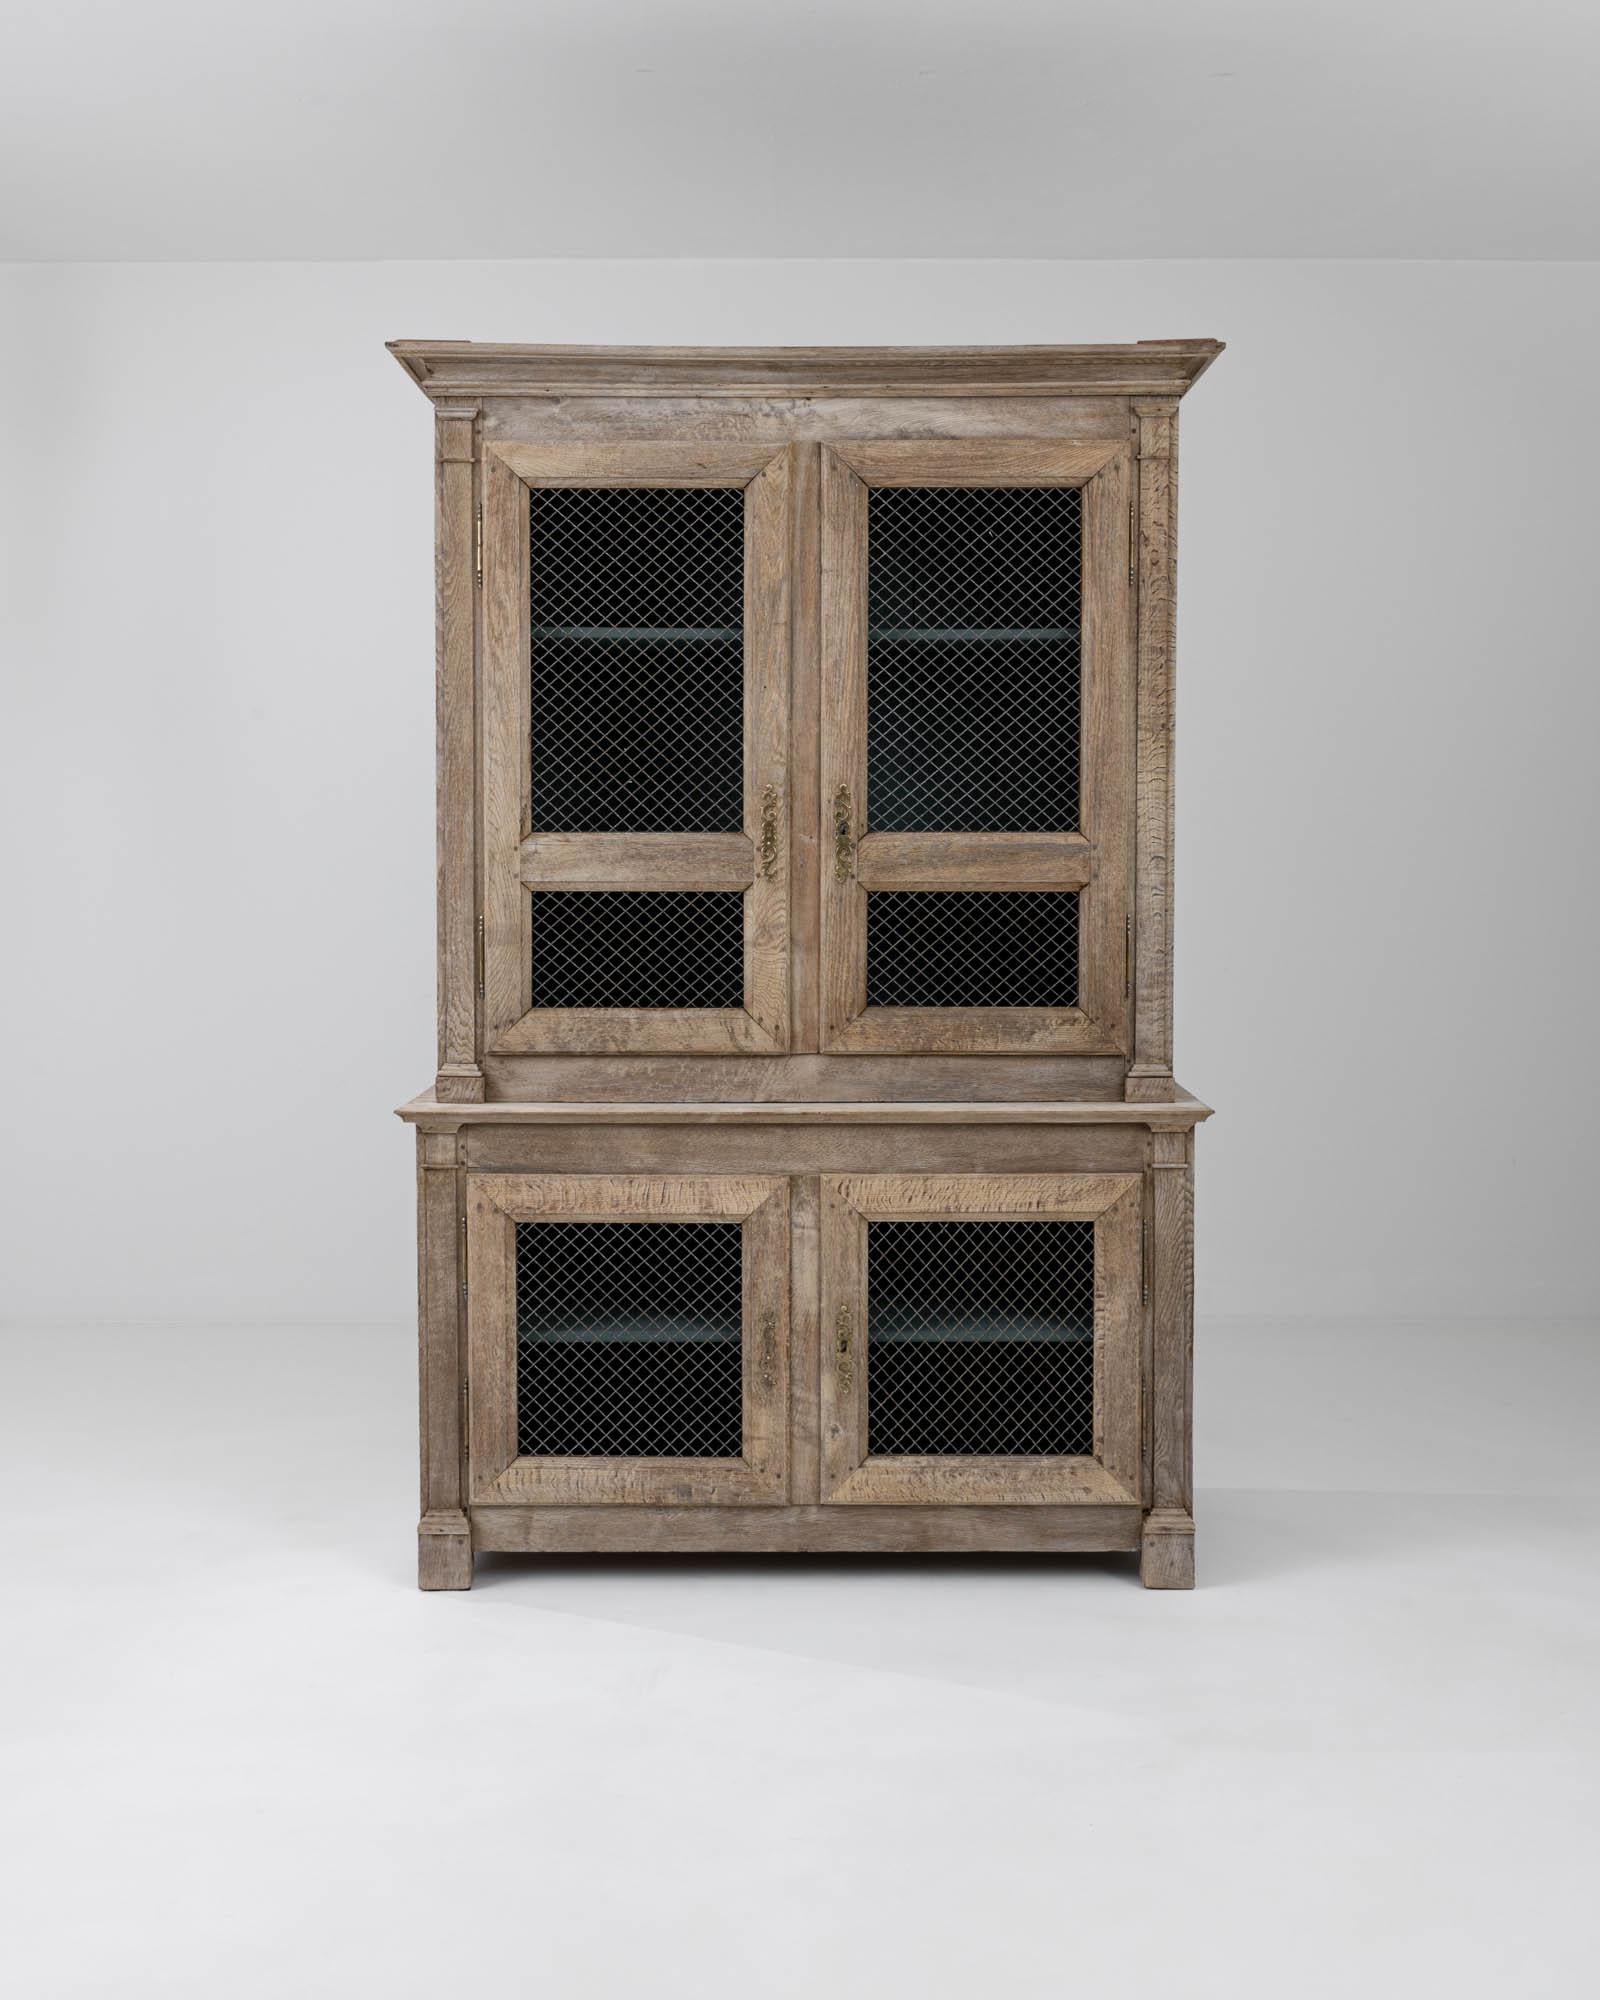 A sturdy two piece cabinet created in 19th century France. Stylishly enclosing a generous storage space, this elegant cabinet exudes a sense of grace and approachable familiarity. Its wire mesh doors conjure an image of linens dried in the summer